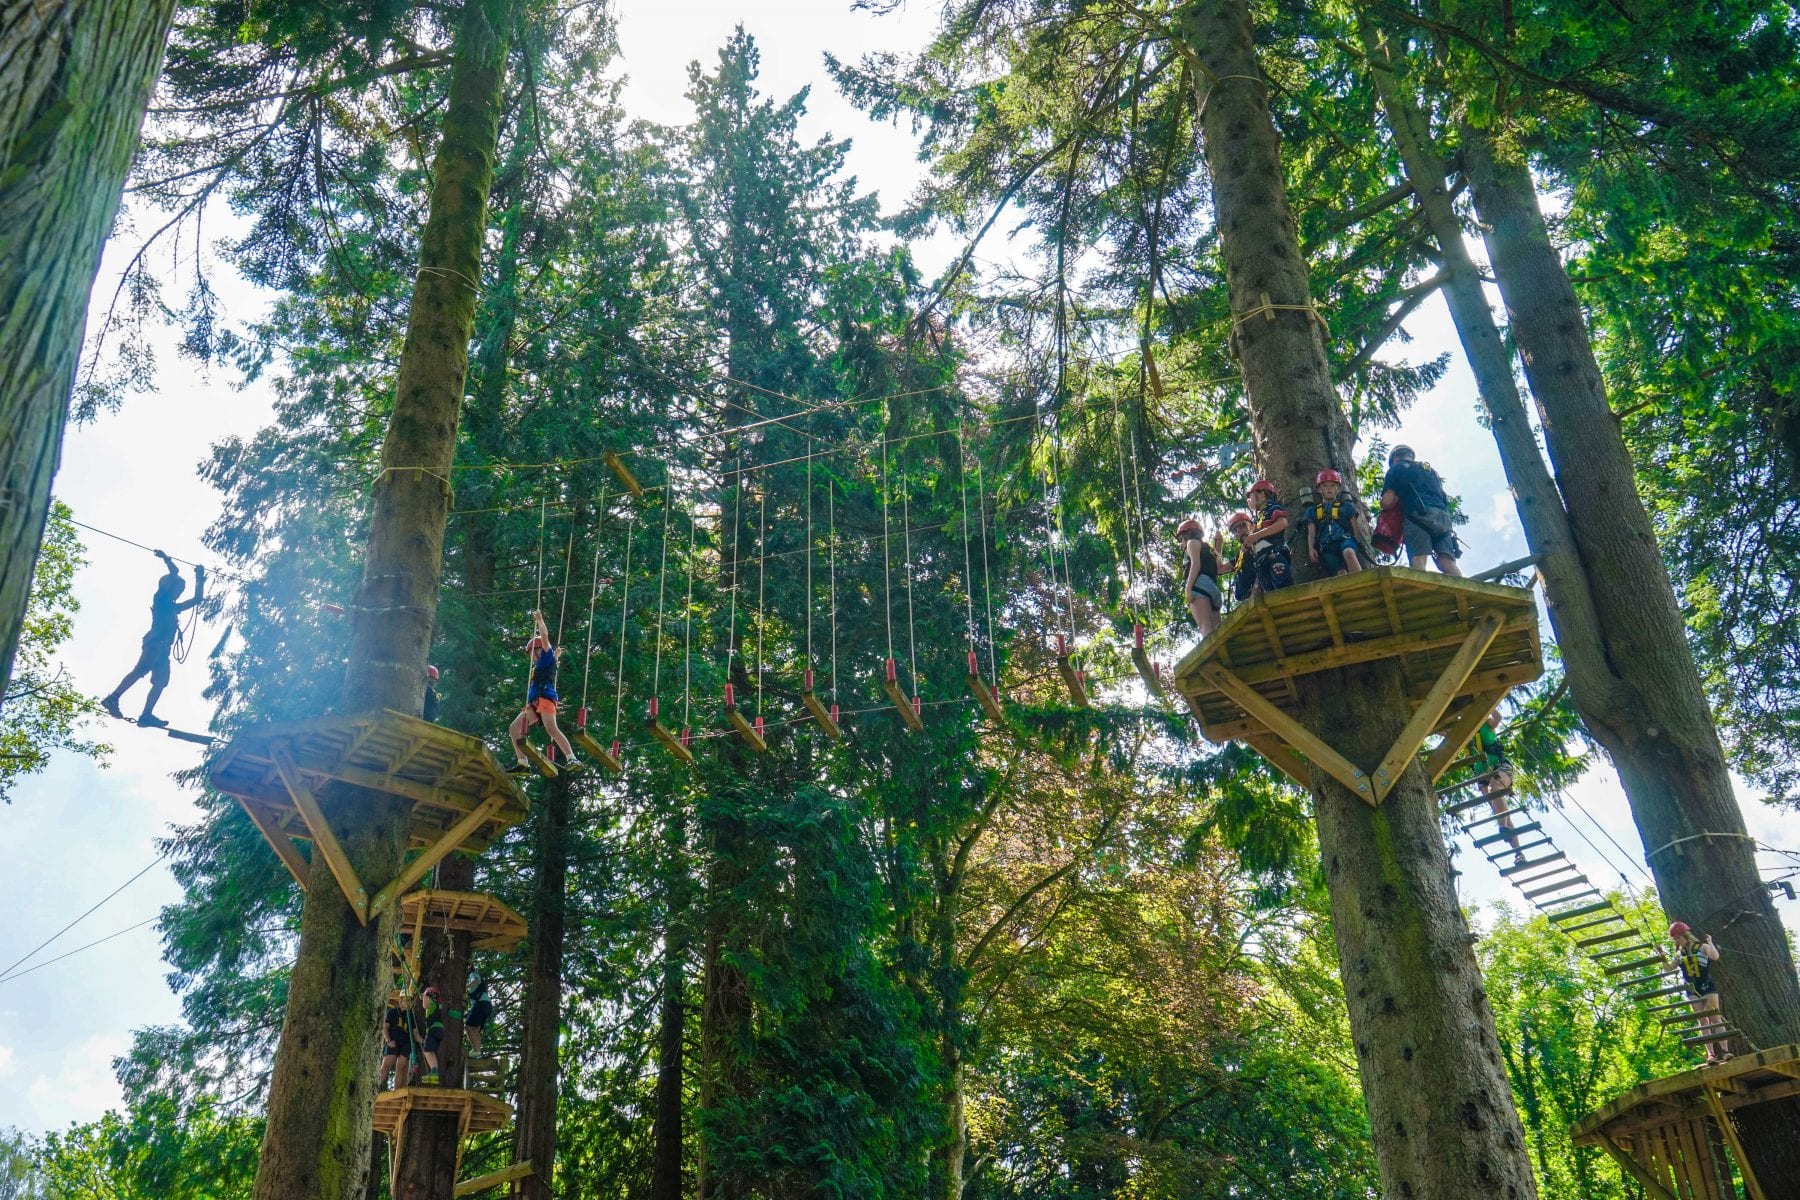 People exploring high up in the trees on the high ropes course.